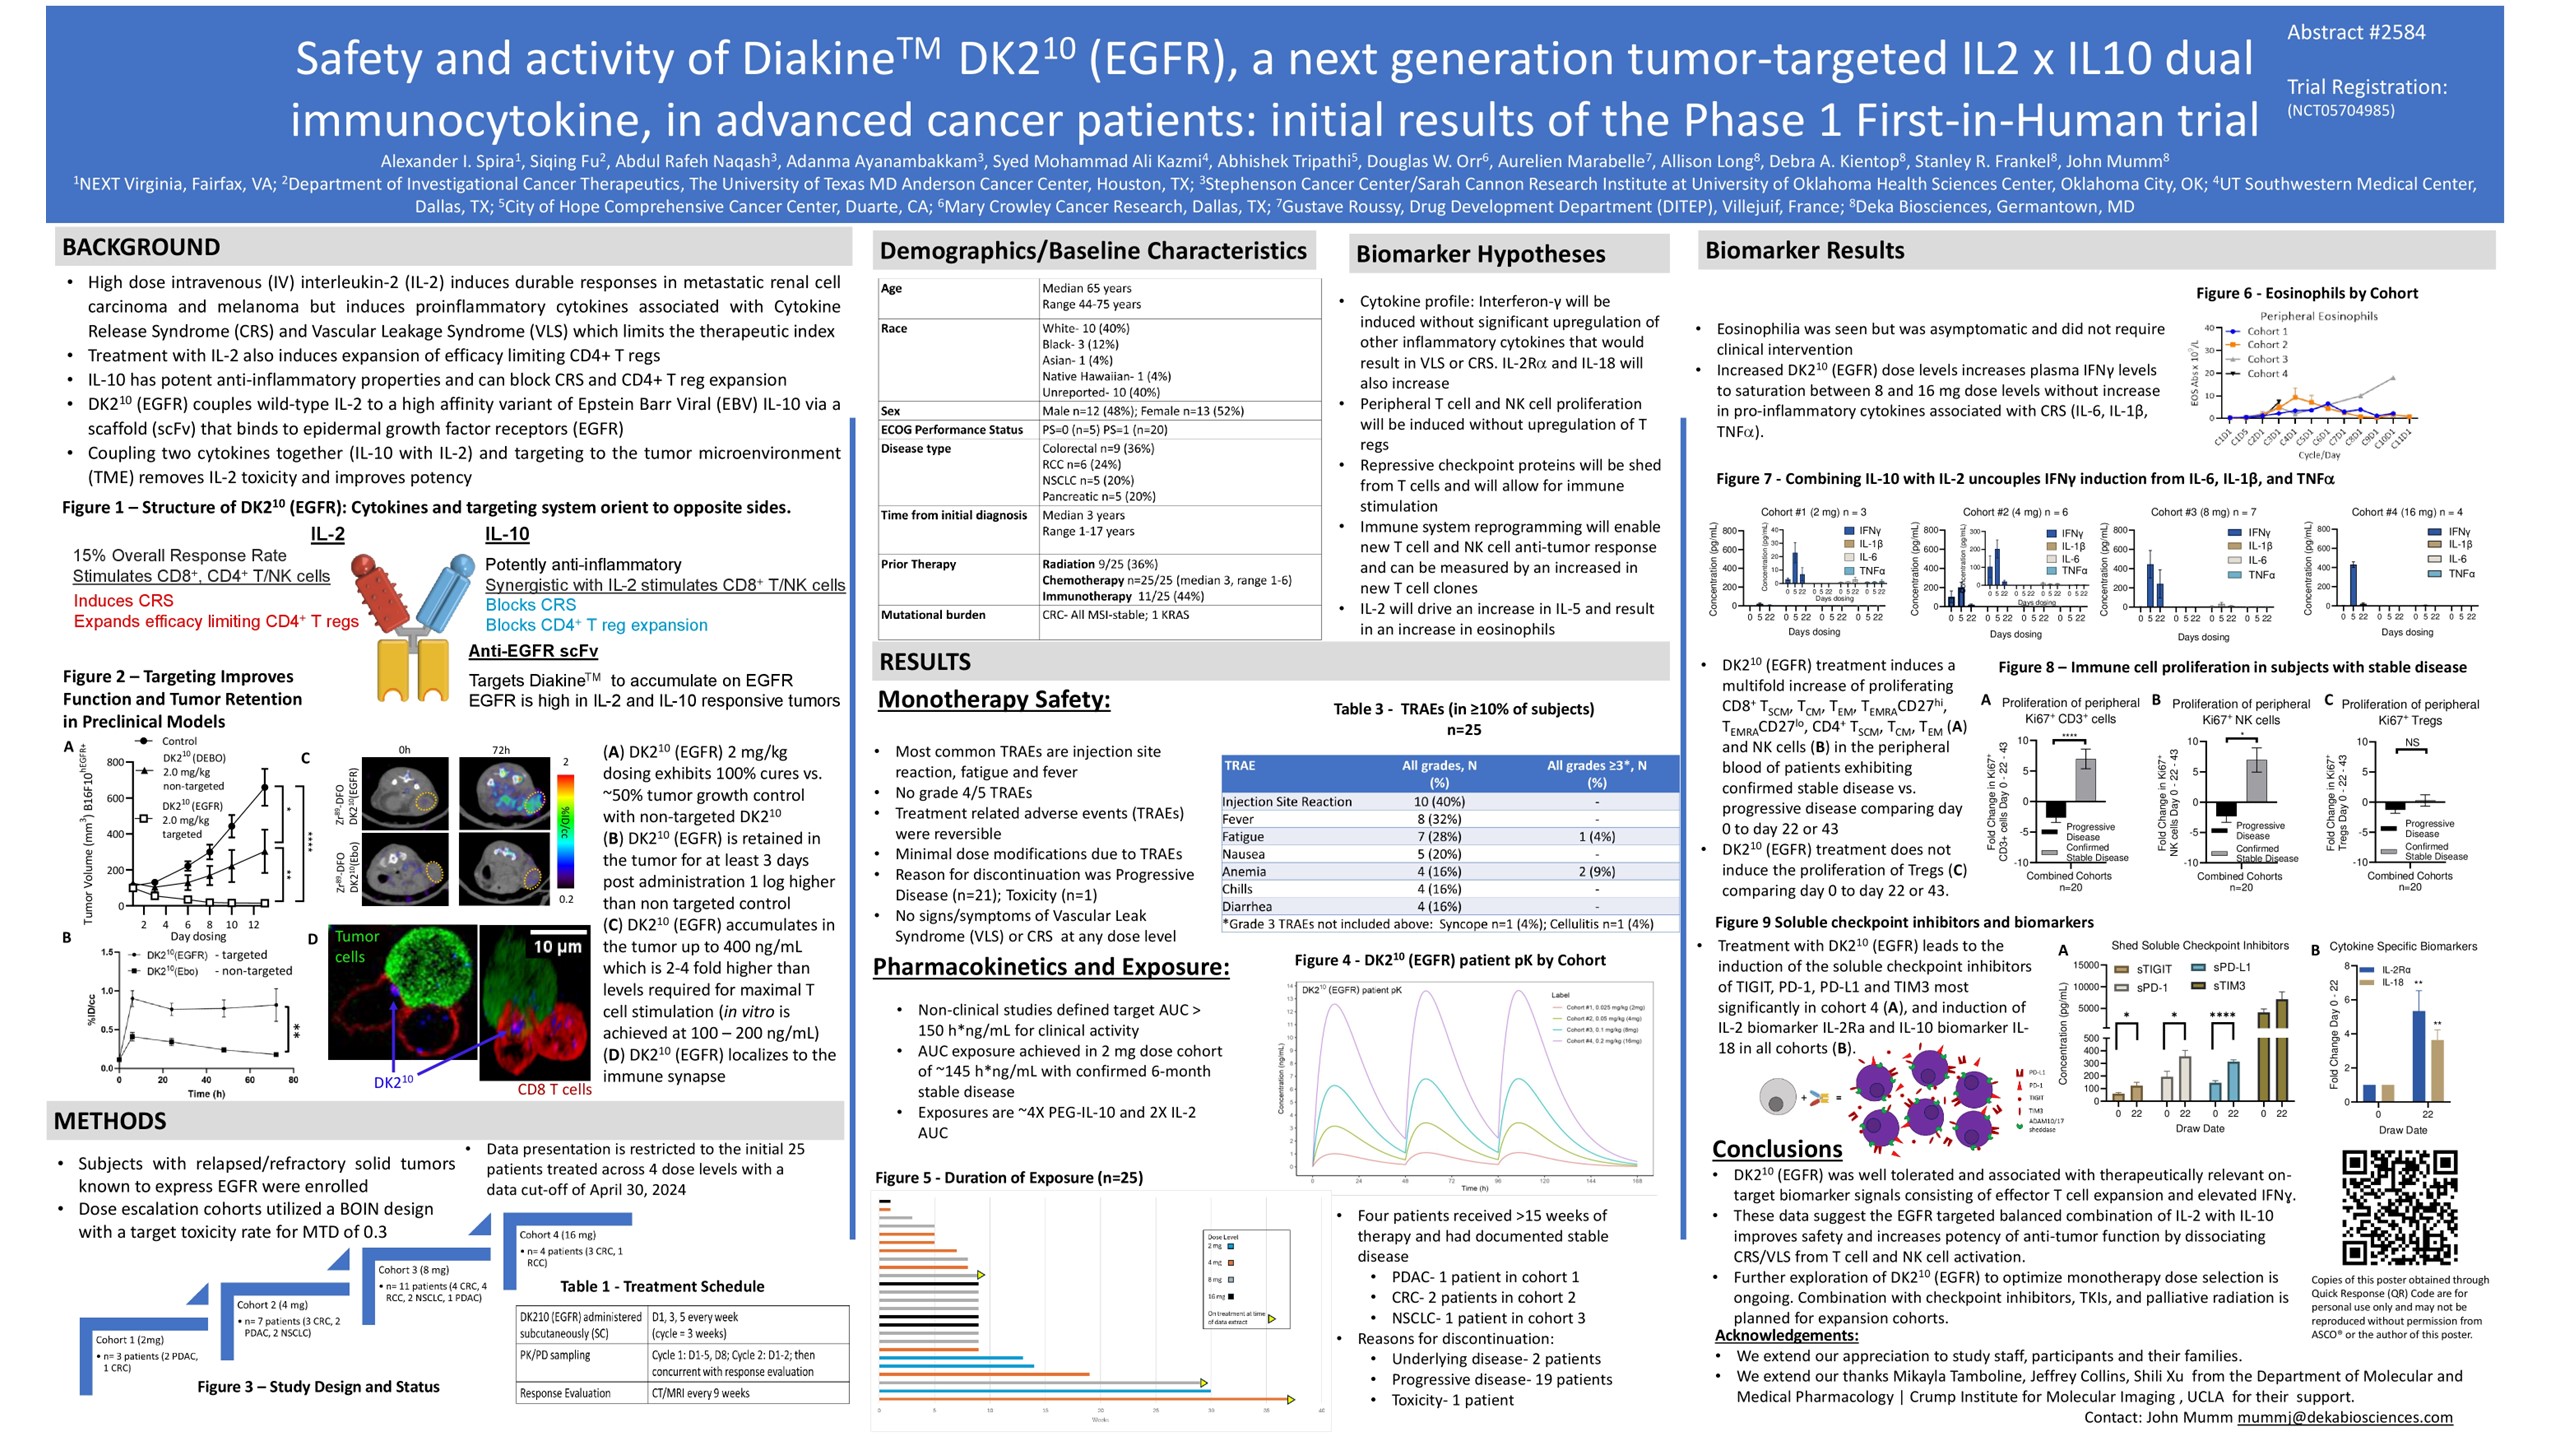 Safety and activity of Diakine DK210 (EGFR), a next generation tumor-targeted IL2 x IL10 dual immunocytokine, in patients with advanced cancer: Initial results of the phase 1 first-in-human trial.